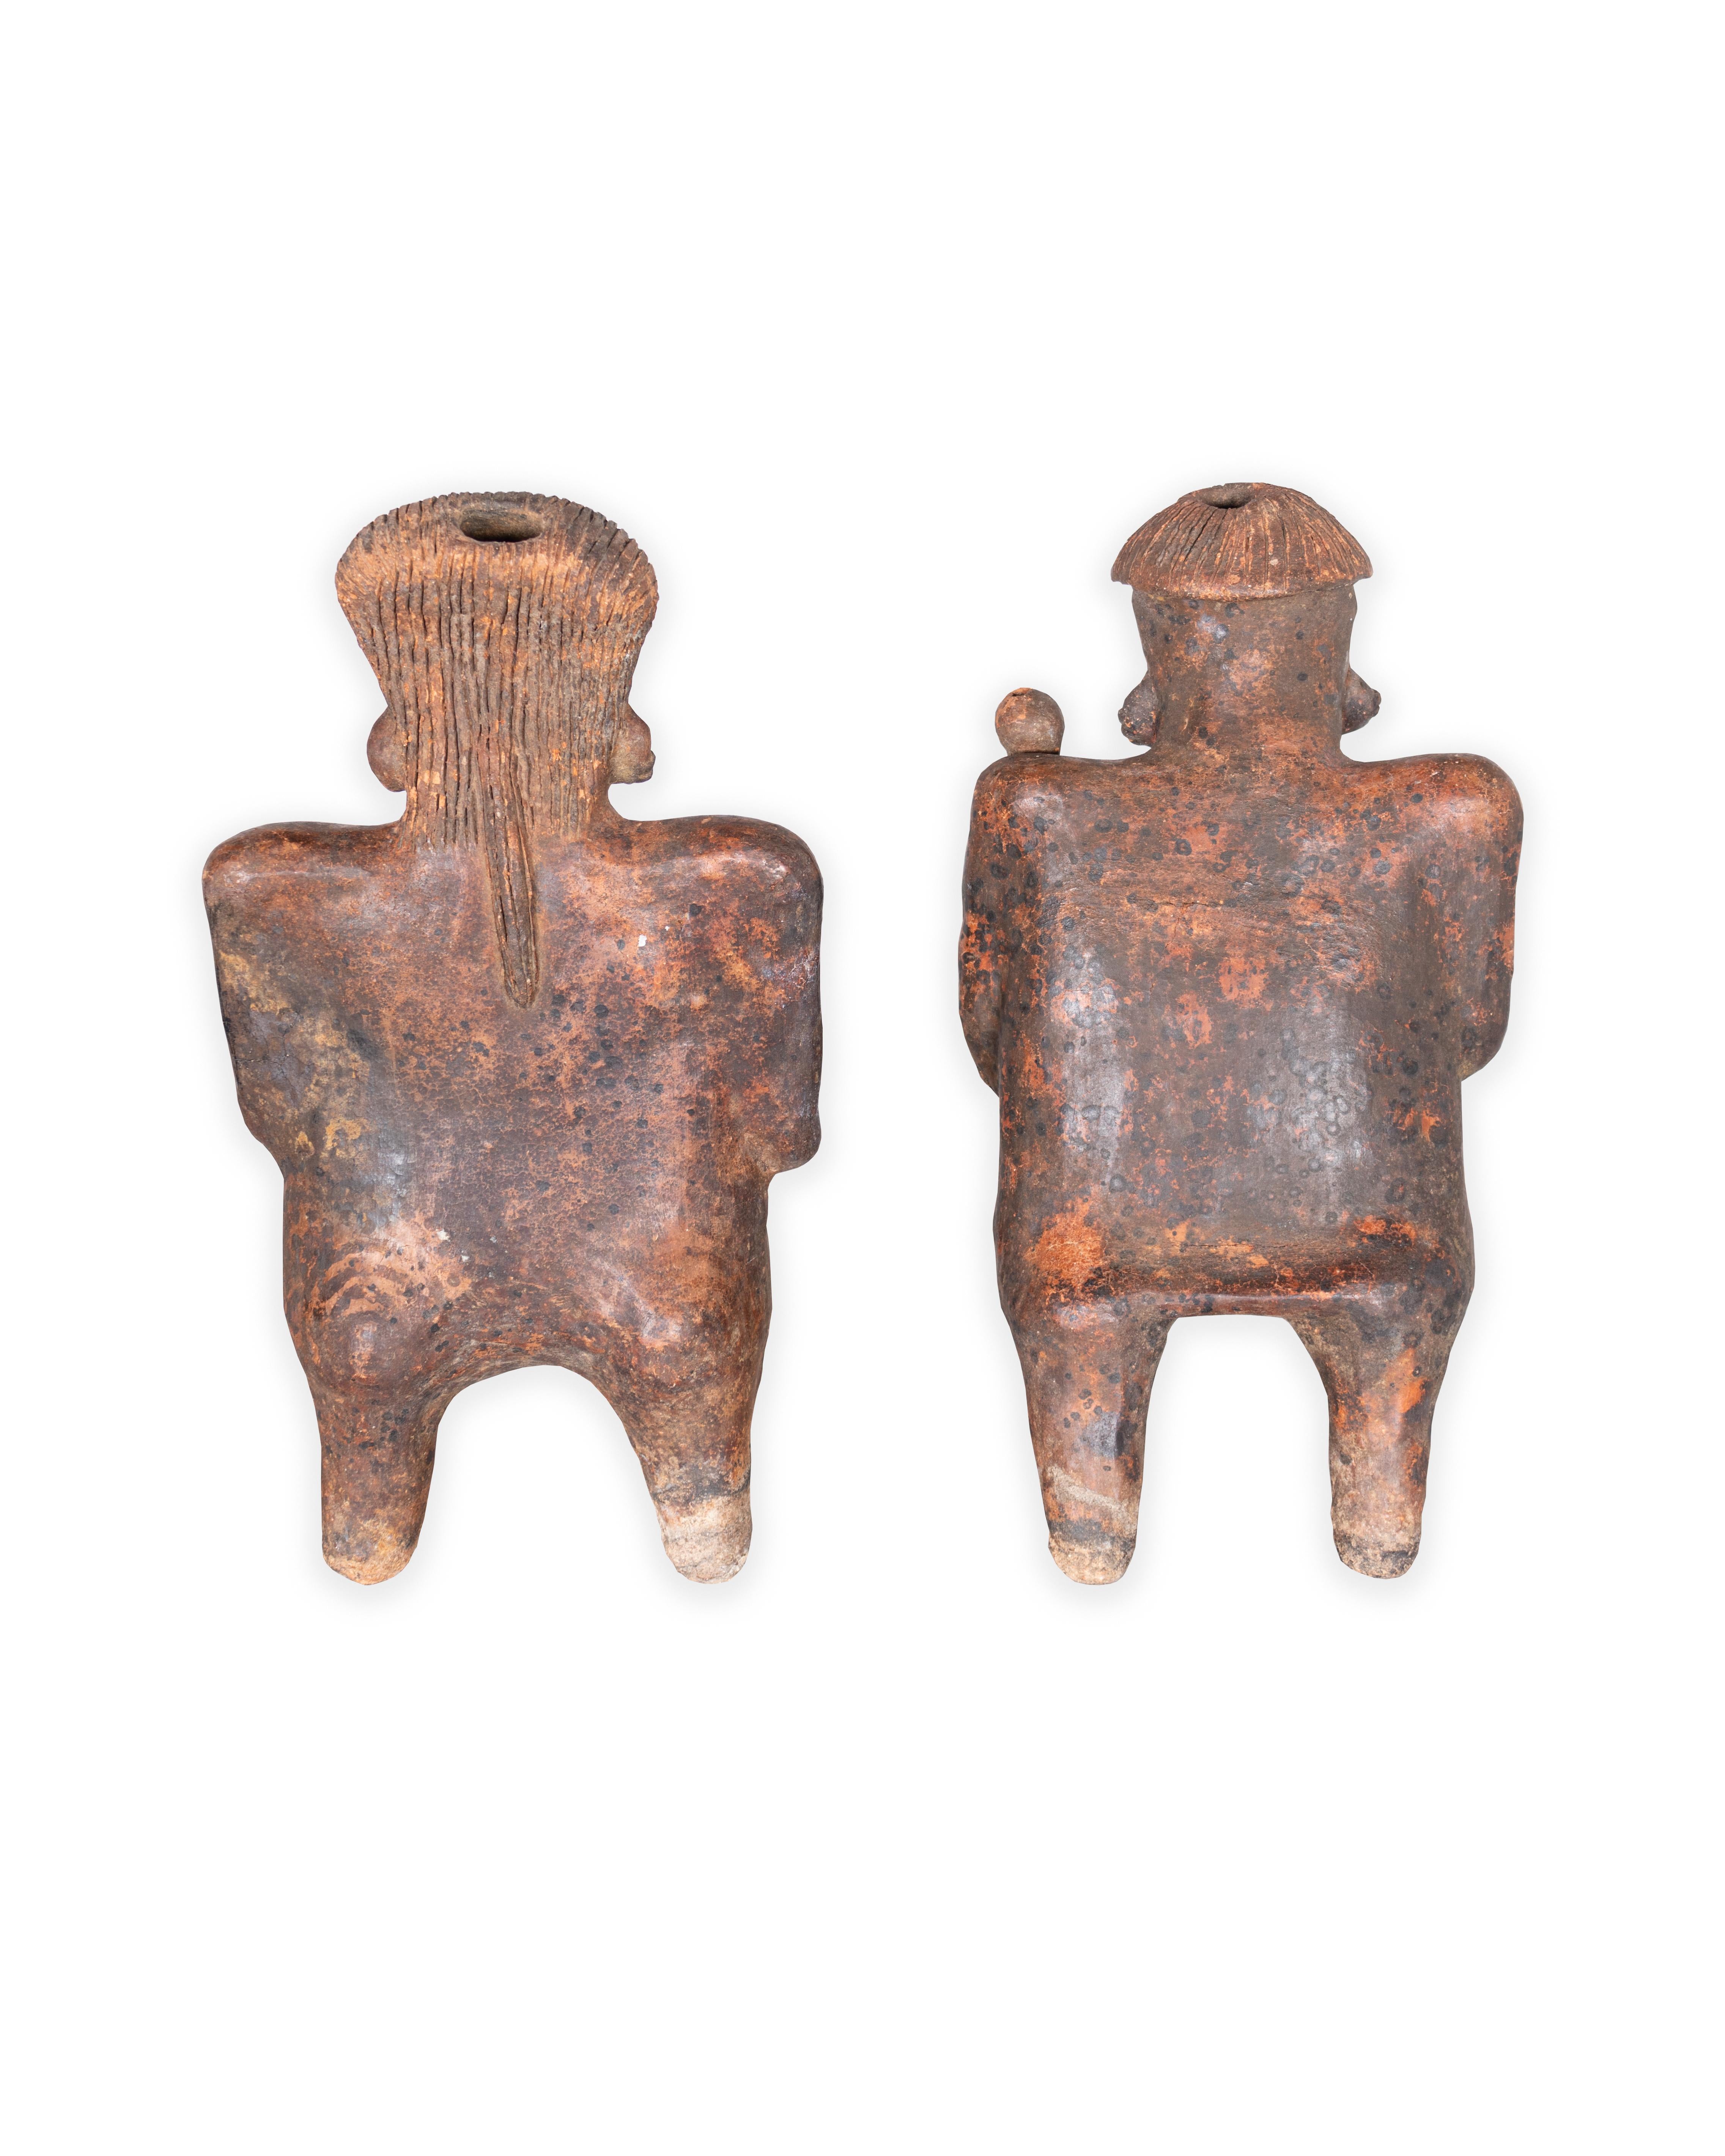 Pair of Jalisco terra cotta tomb figures. In my organic, contemporary, vintage and mid-century modern style.

Curated for our one of a kind line, Le Monde. Exclusive to Brendan Bass.